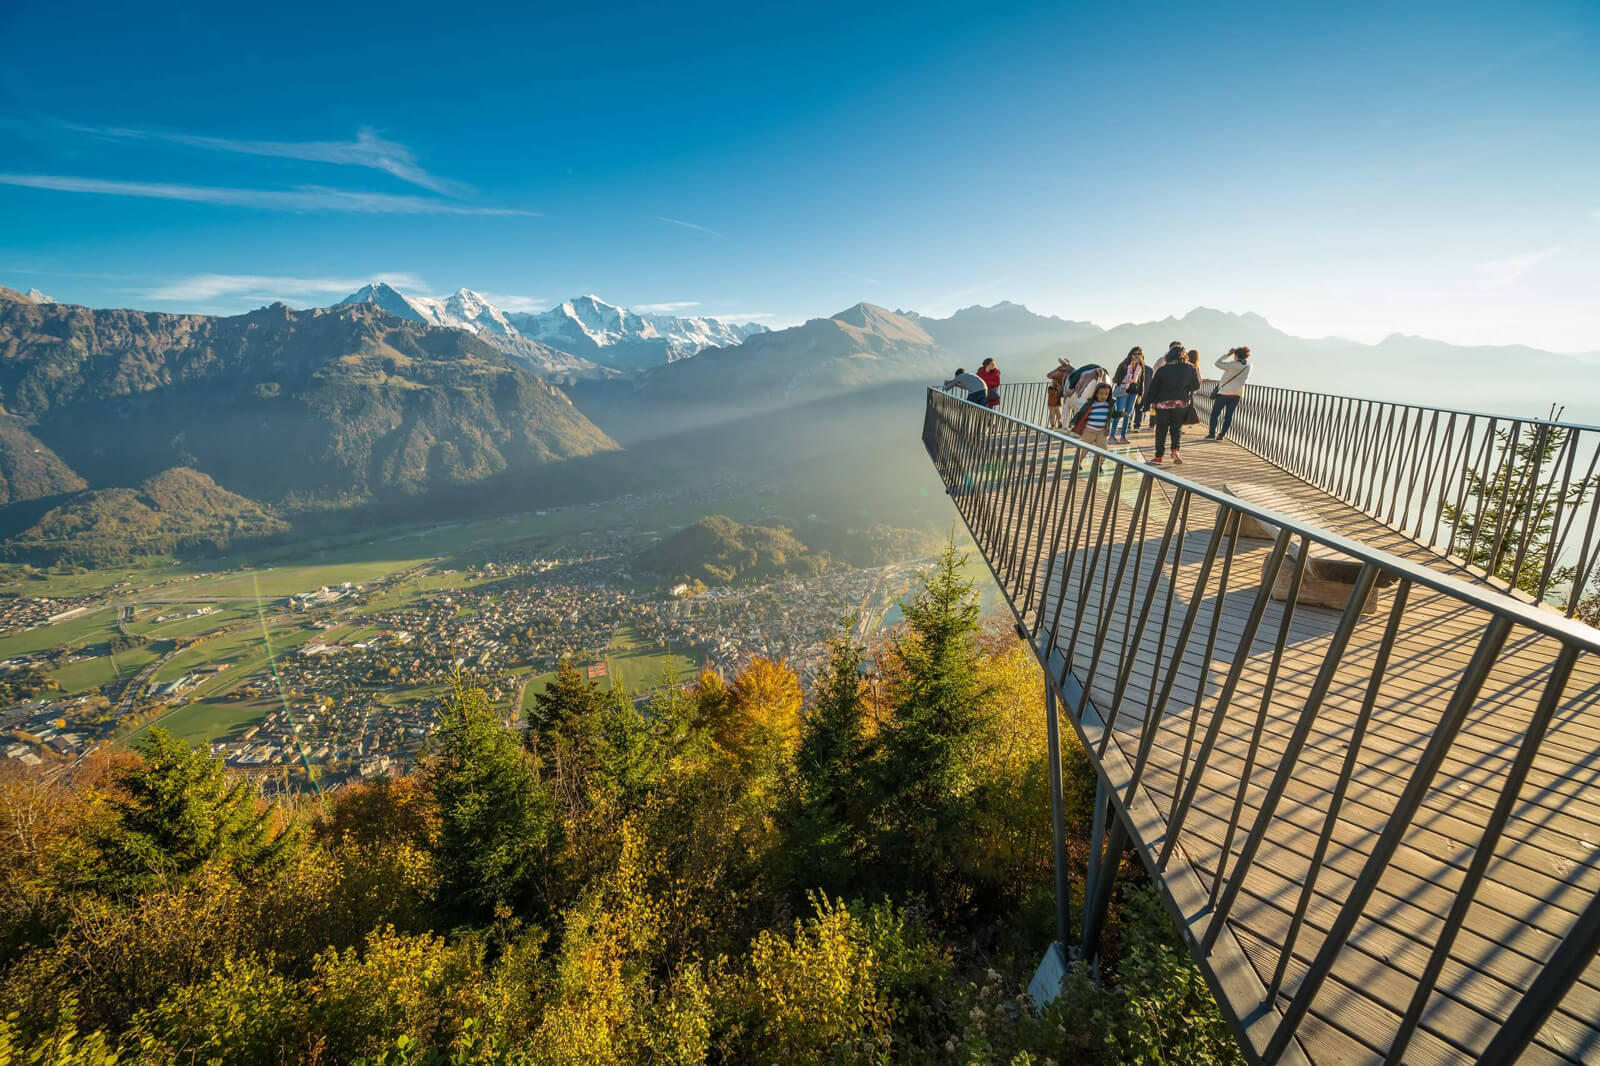 Reach the Harder Kulm viewing point at a height of 1,322 meters above sea level